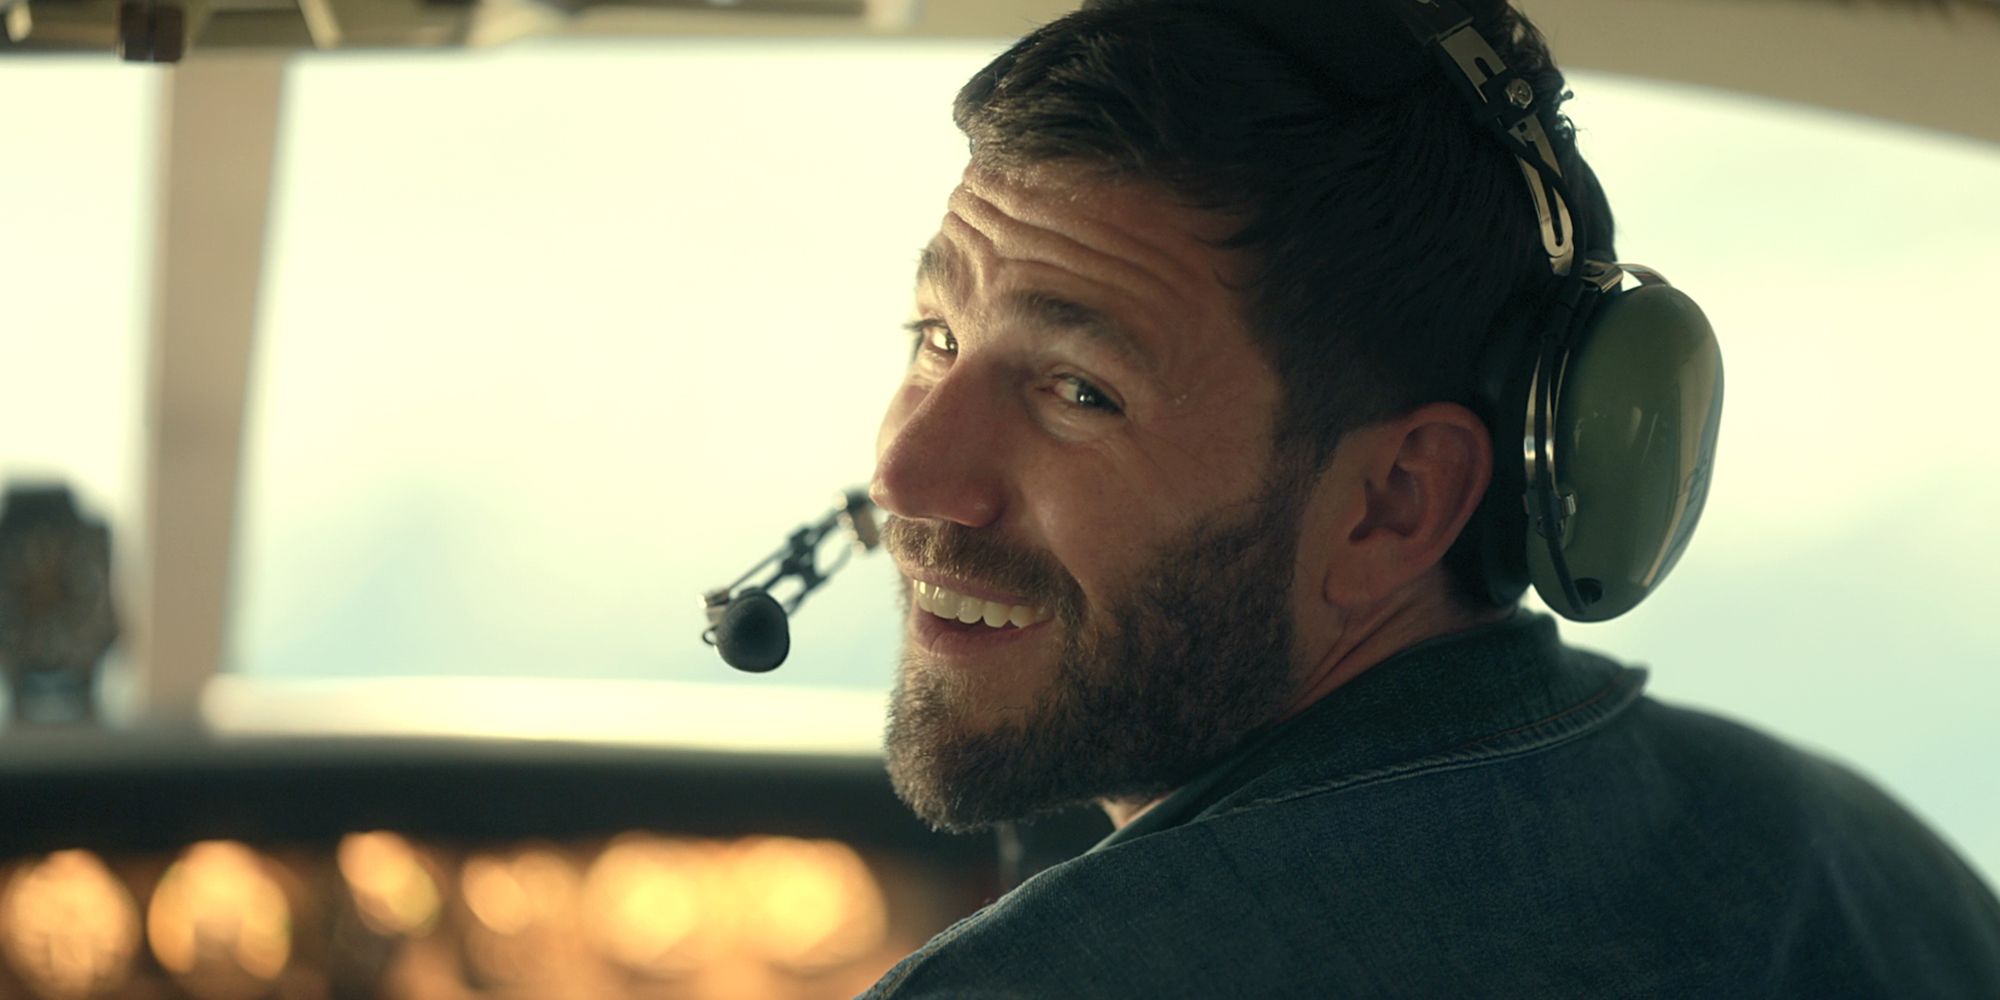 Austin Stowell as Sam in a plane with headset on in Season 1 Episode 1 of Keep Breathing